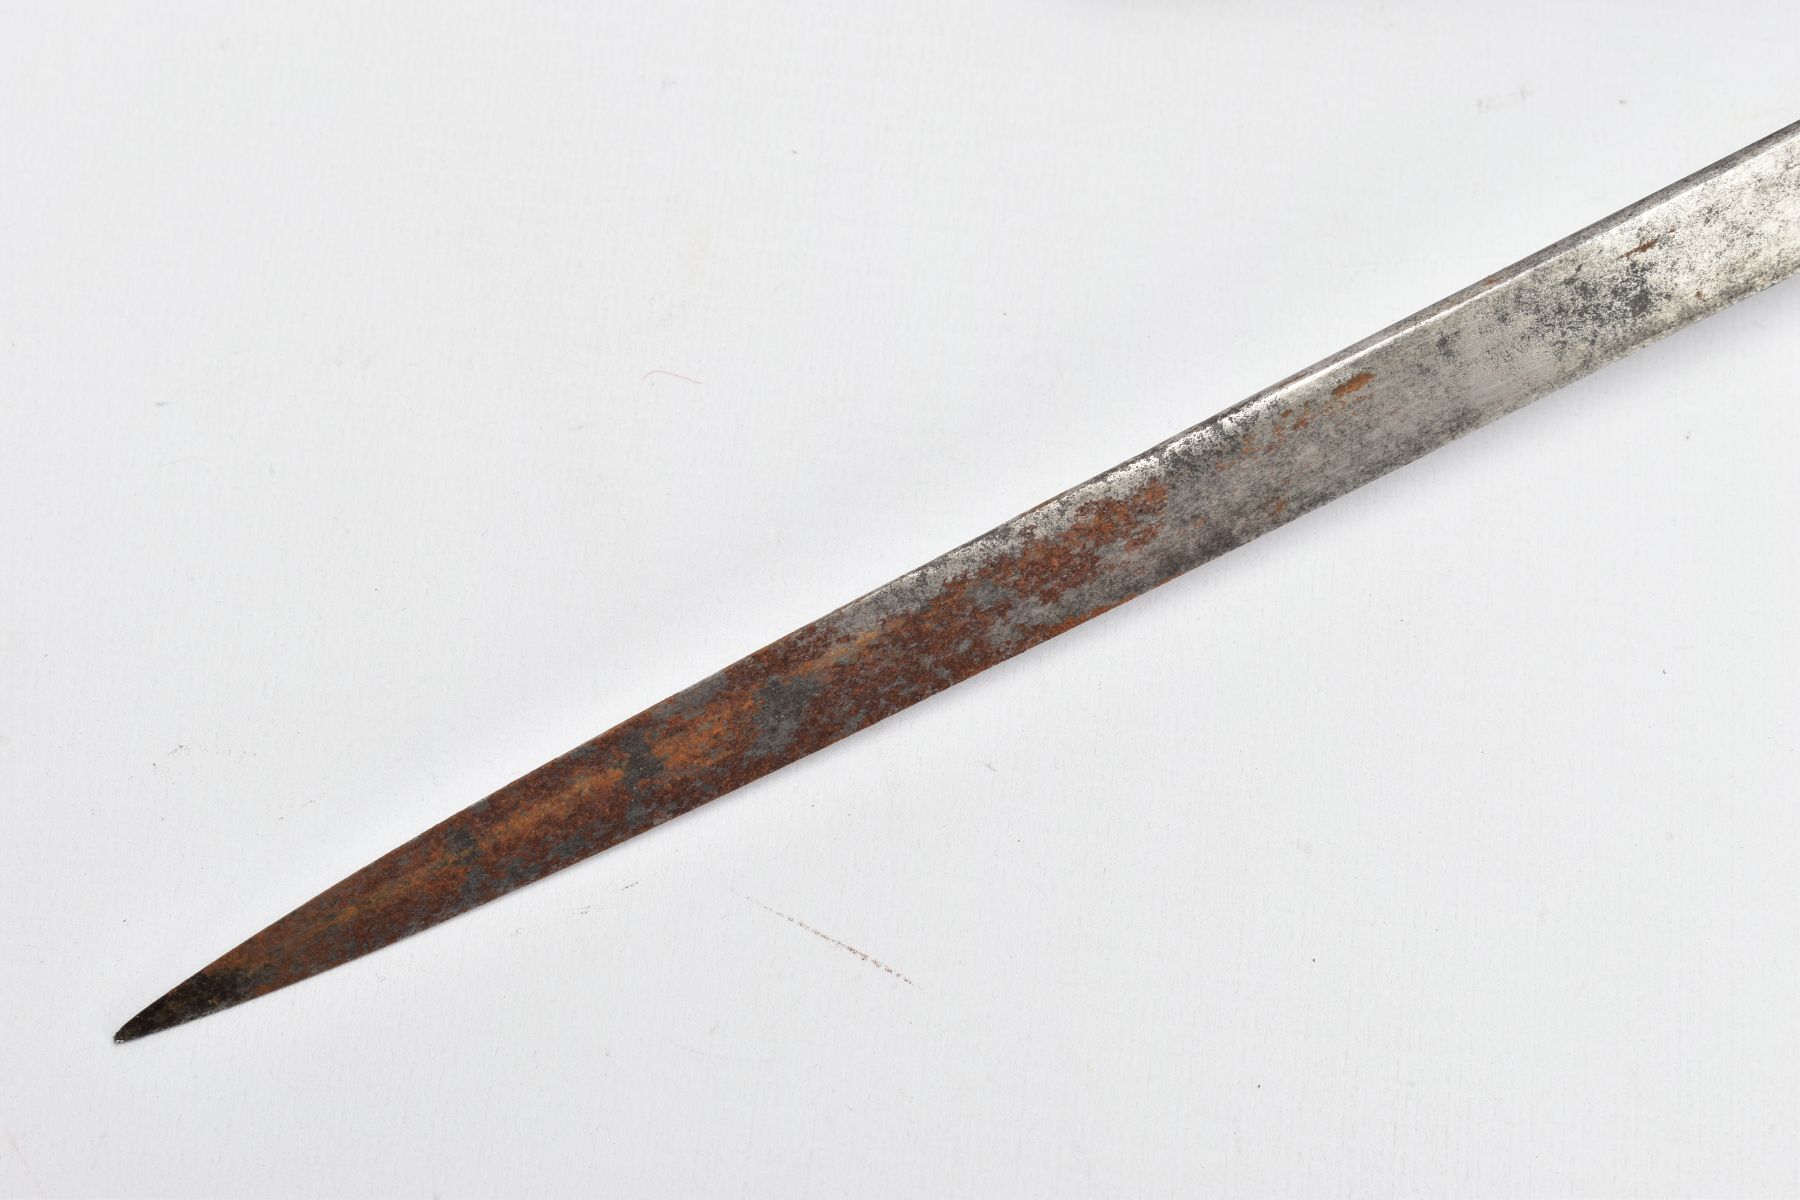 A FENTON BROTHERS LTD, SHEFFIELD 1897 PATTERN INFANTRY OFFICERS SWORD AND SCABBARD, the blade is - Image 10 of 15